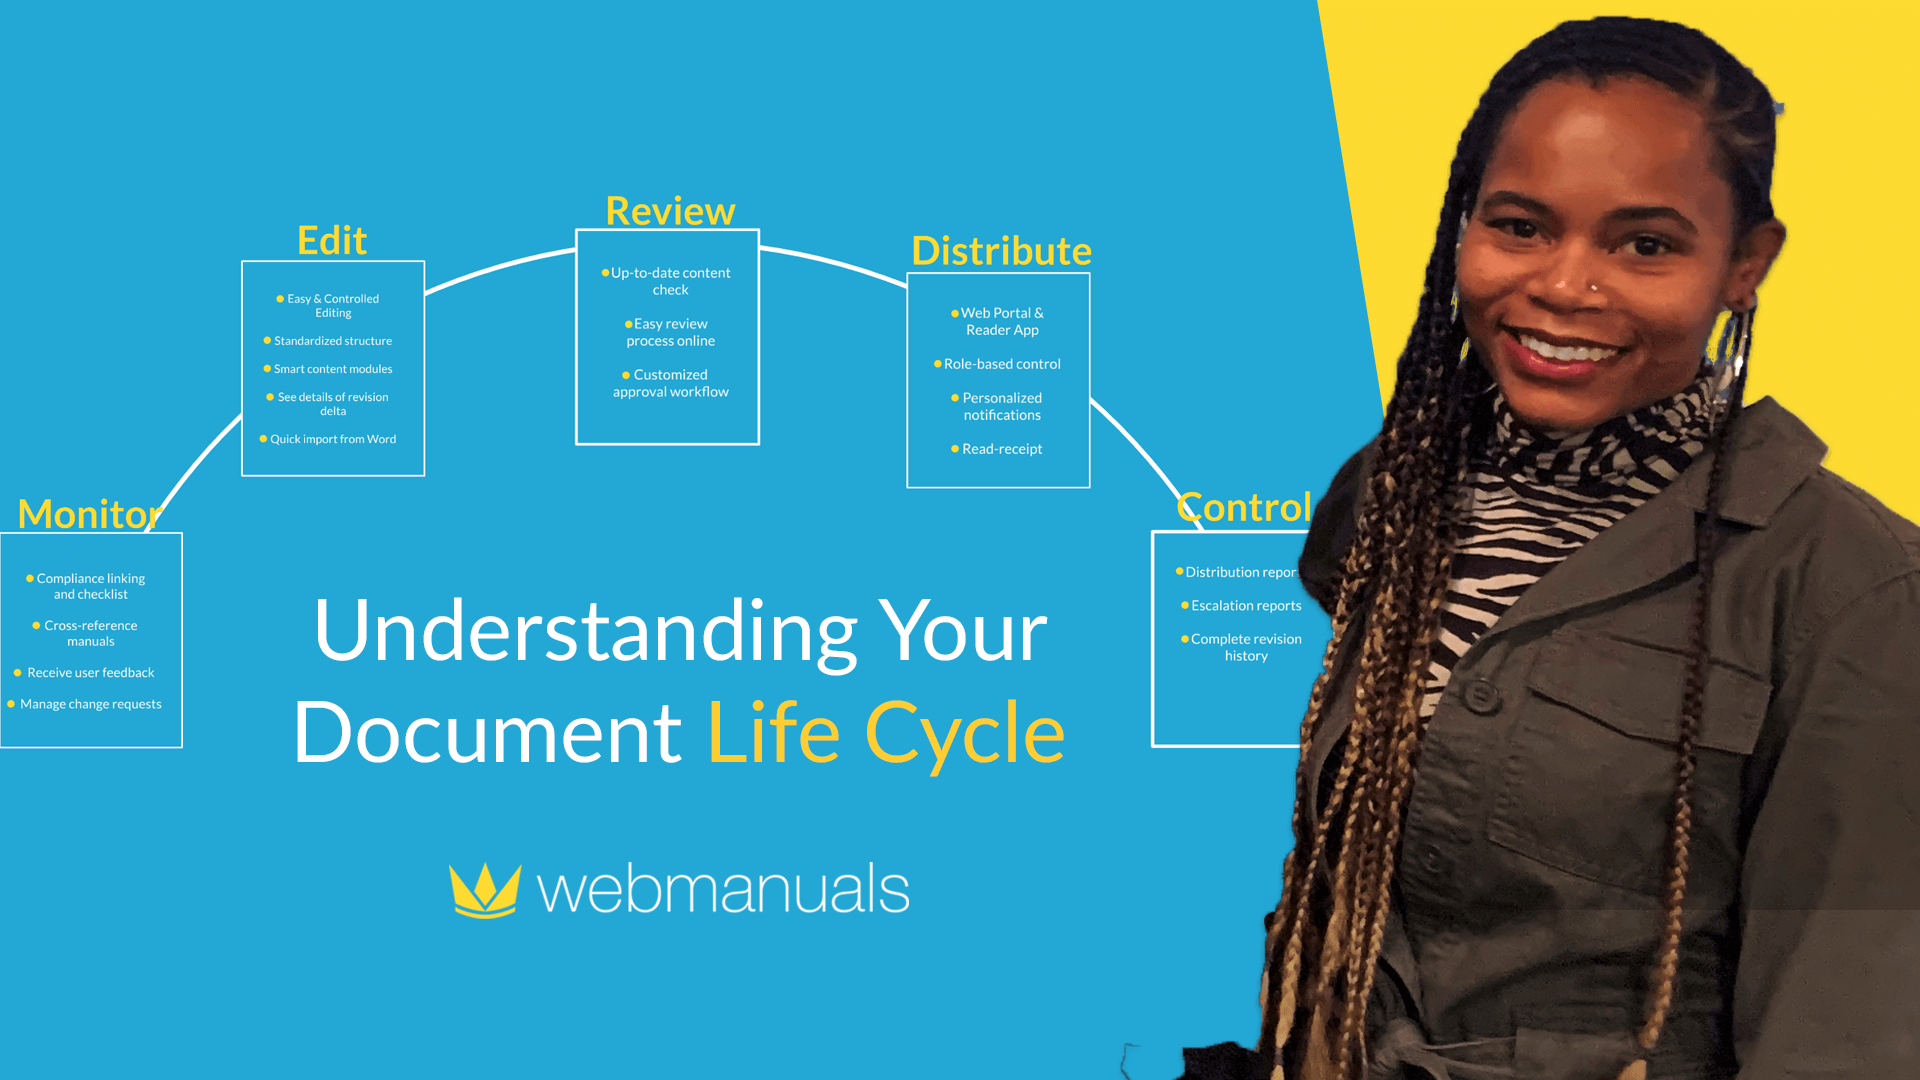 web manuals understanding the document life cycle